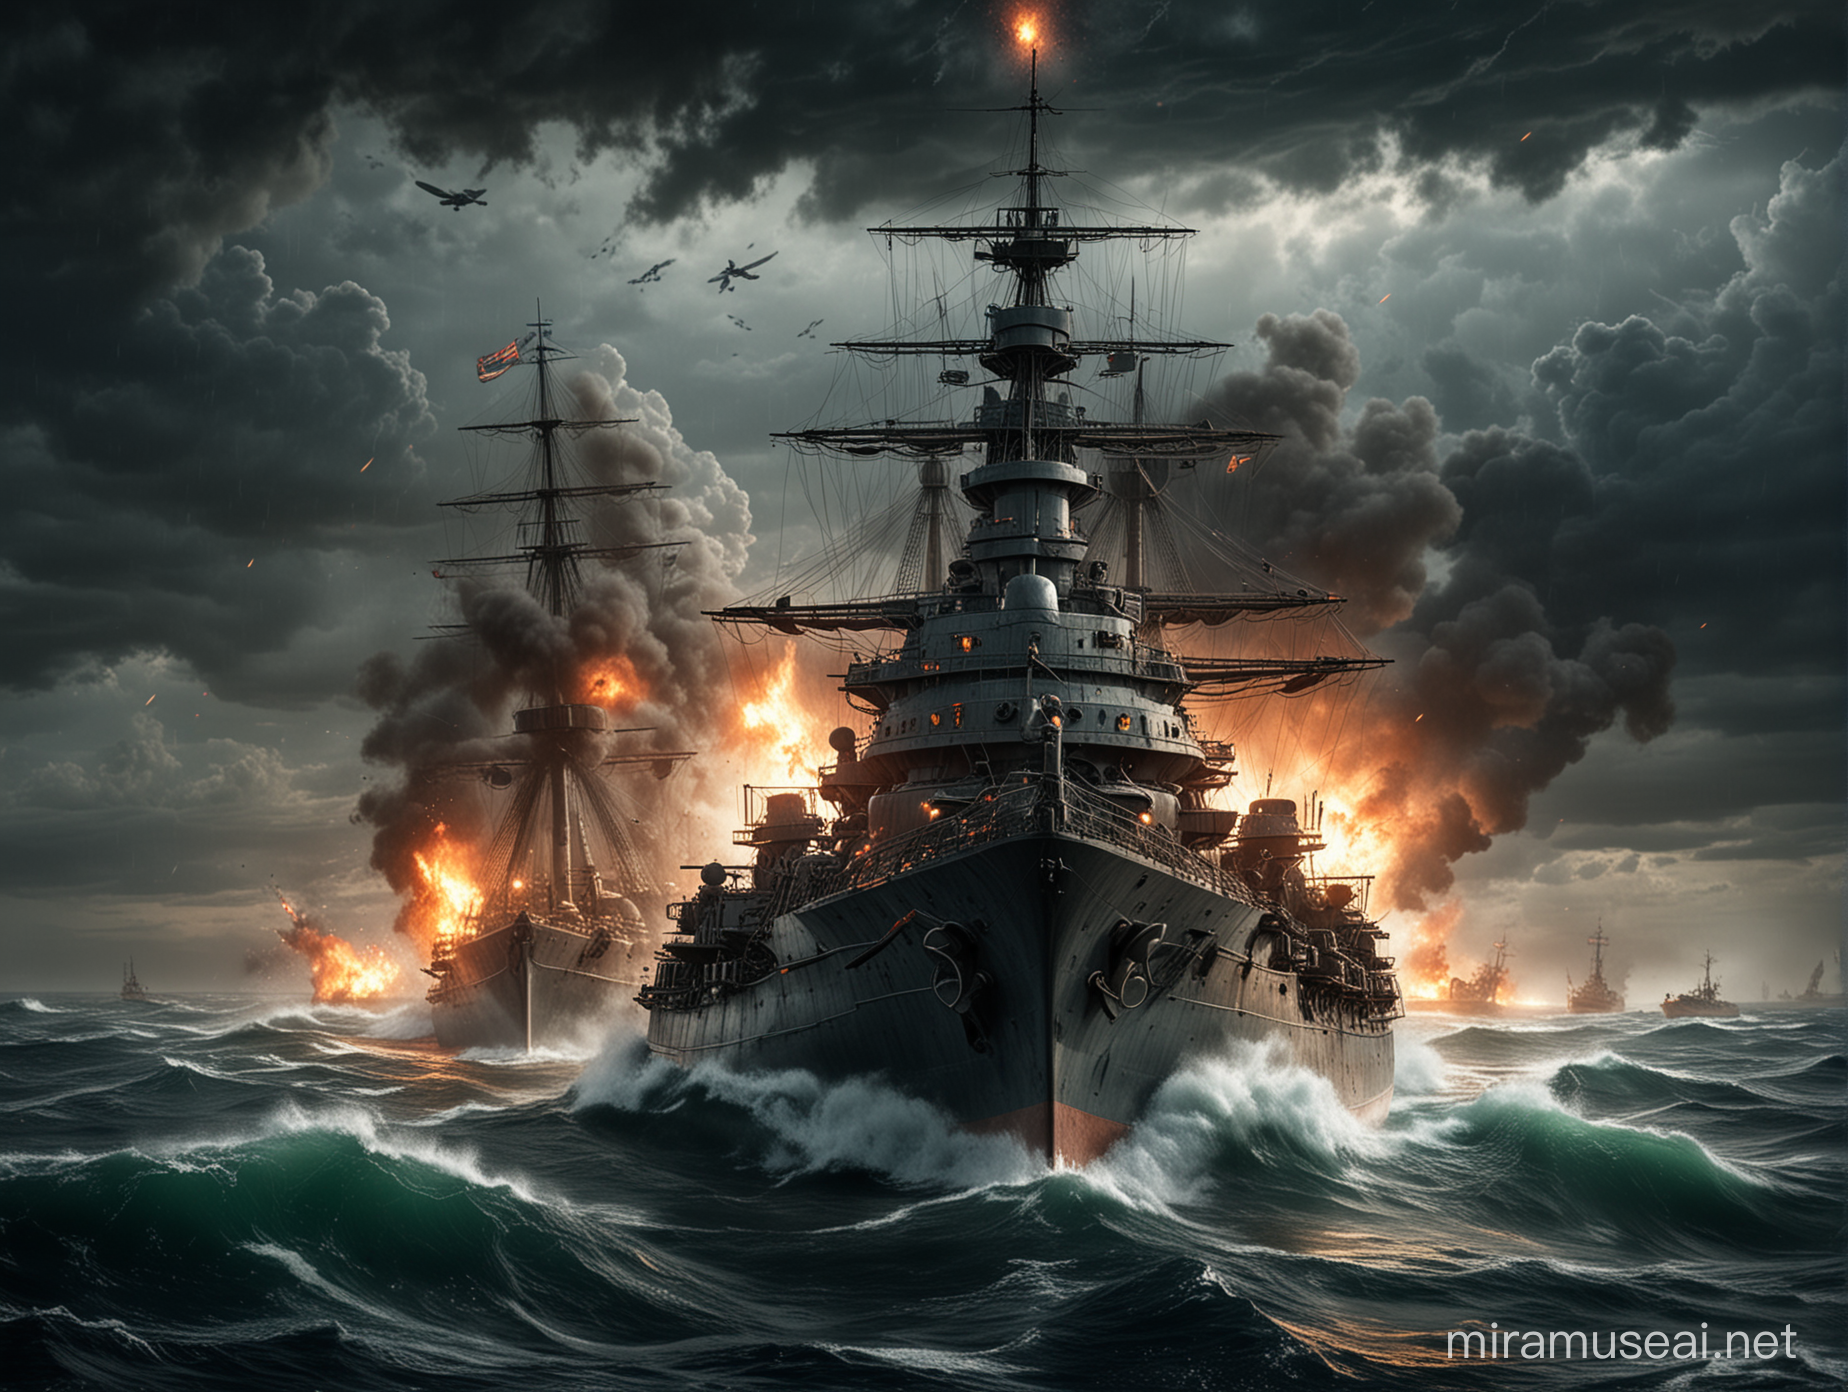 a battleship on intense naval fight  and fire on the ship
and a stormy environment